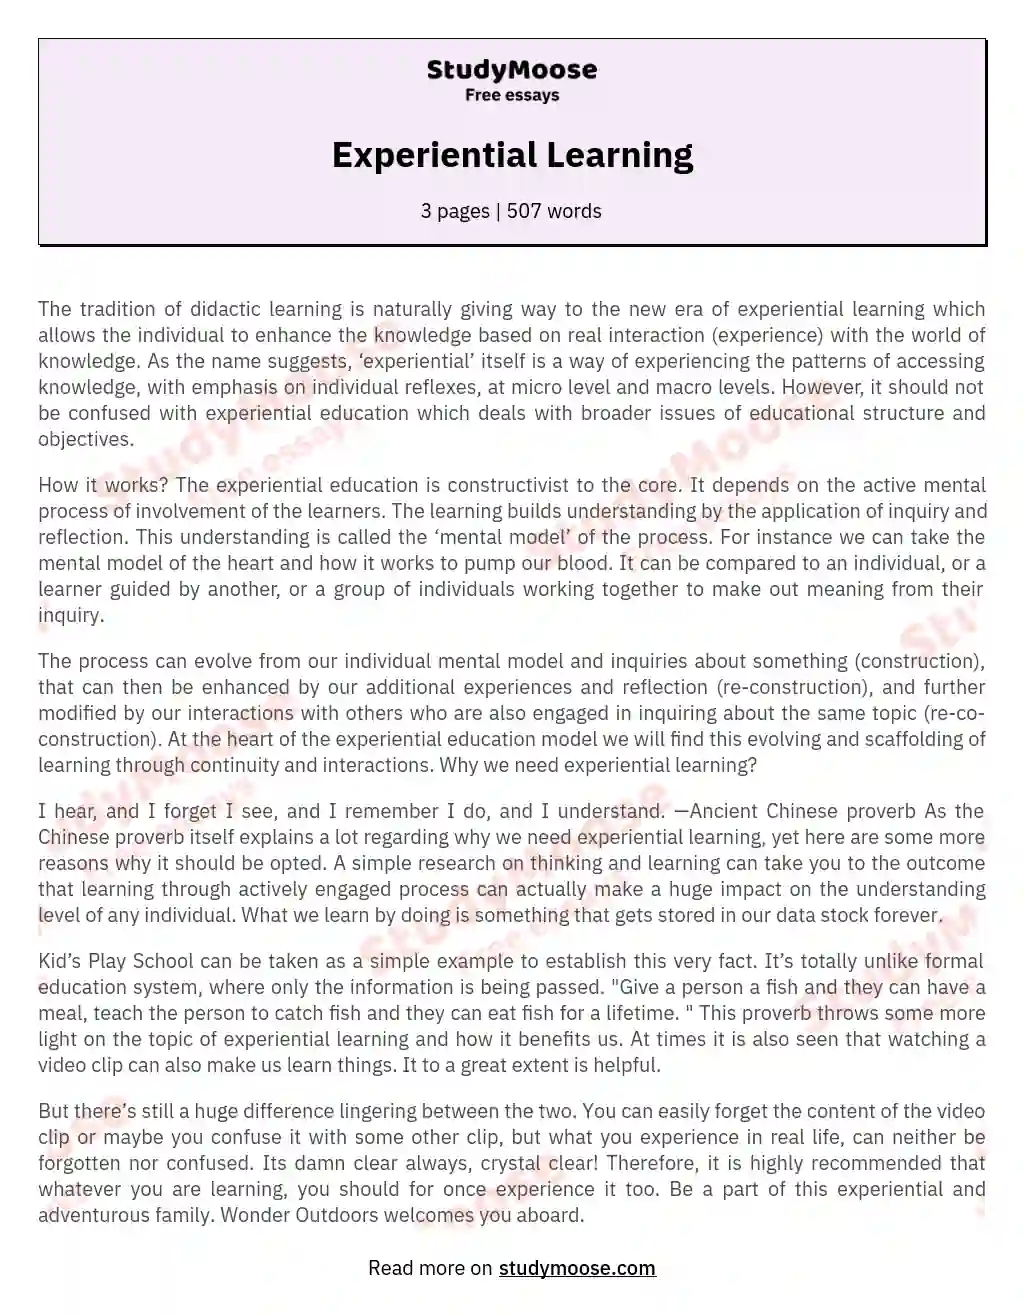 Experiential Learning essay